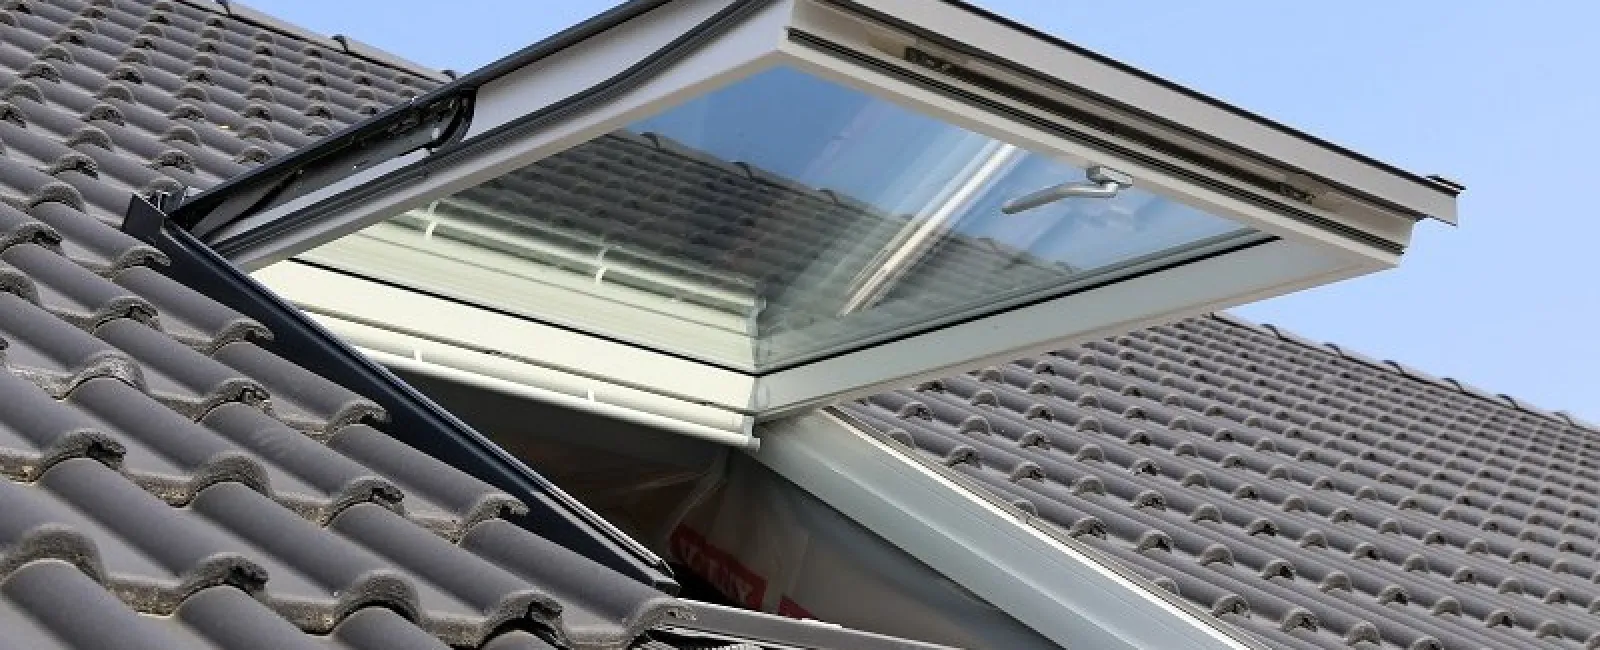 Top Things You Should Know before Installing a Skylight